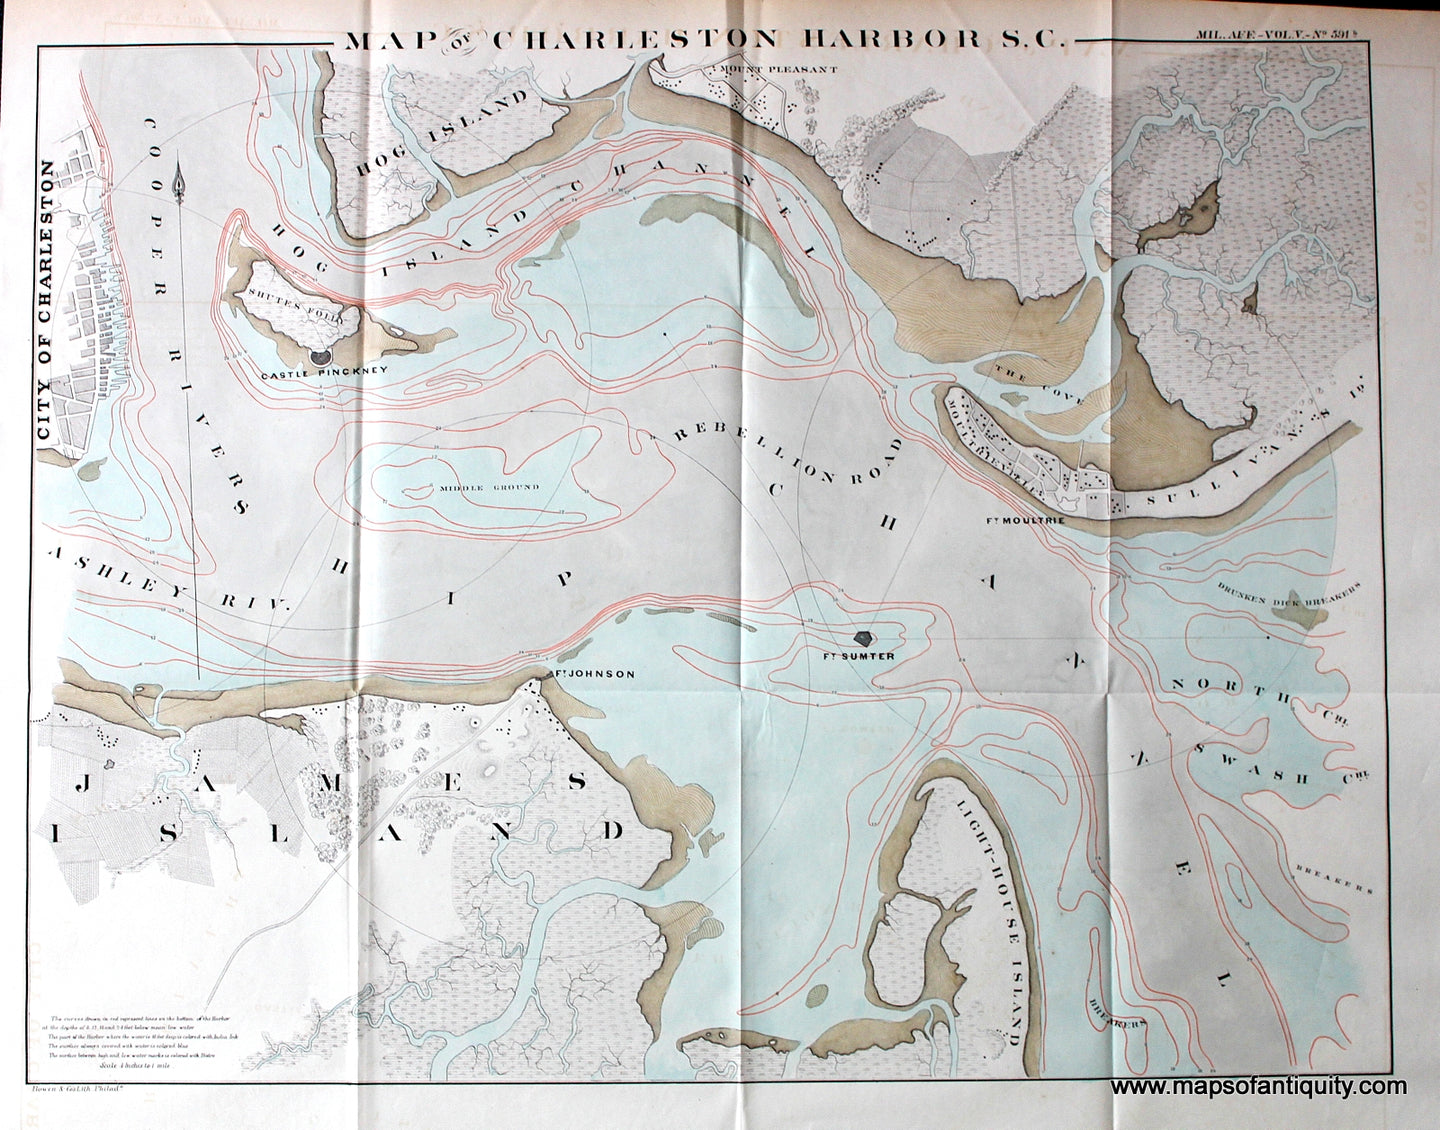 Antique-Hand-Colored-Map-Map-of-Charleston-Harbor-S.C.**********-United-States-South-1860-Bowen-&-Co.-Maps-Of-Antiquity